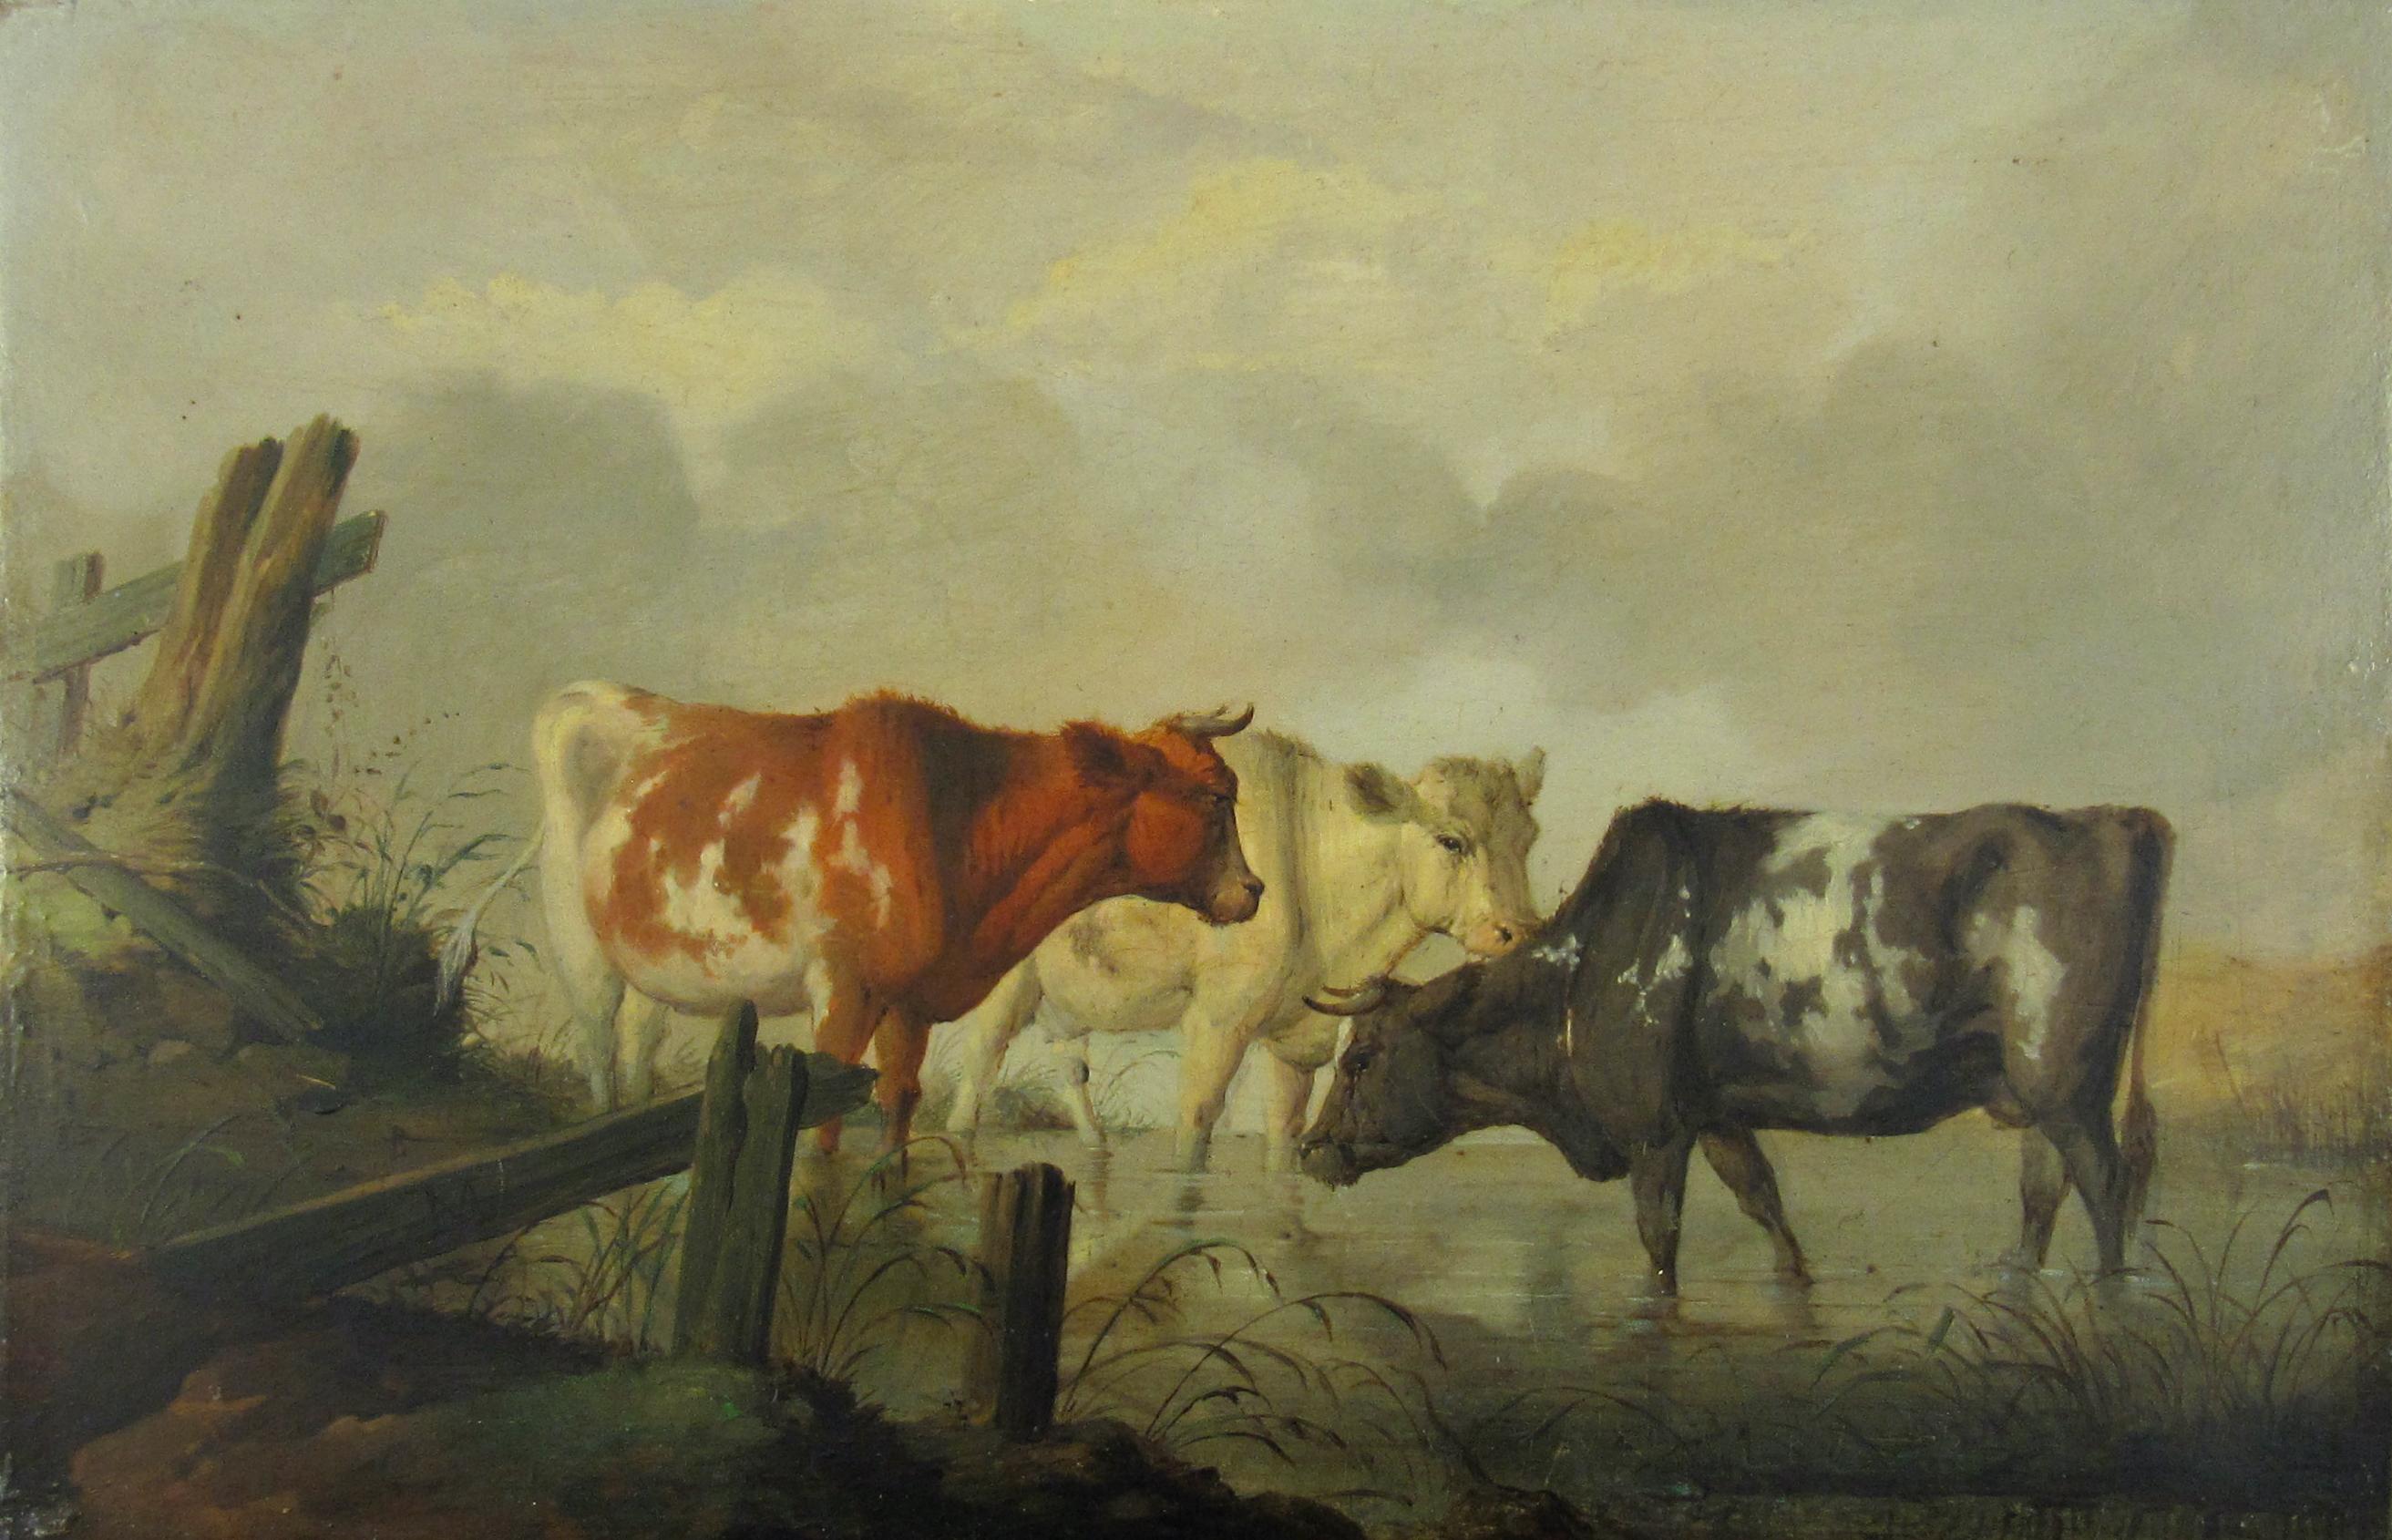 Unknown Figurative Painting - Cows at a Watering Hole - Monogrammed M 19th Century Oil Painting on Panel 1875